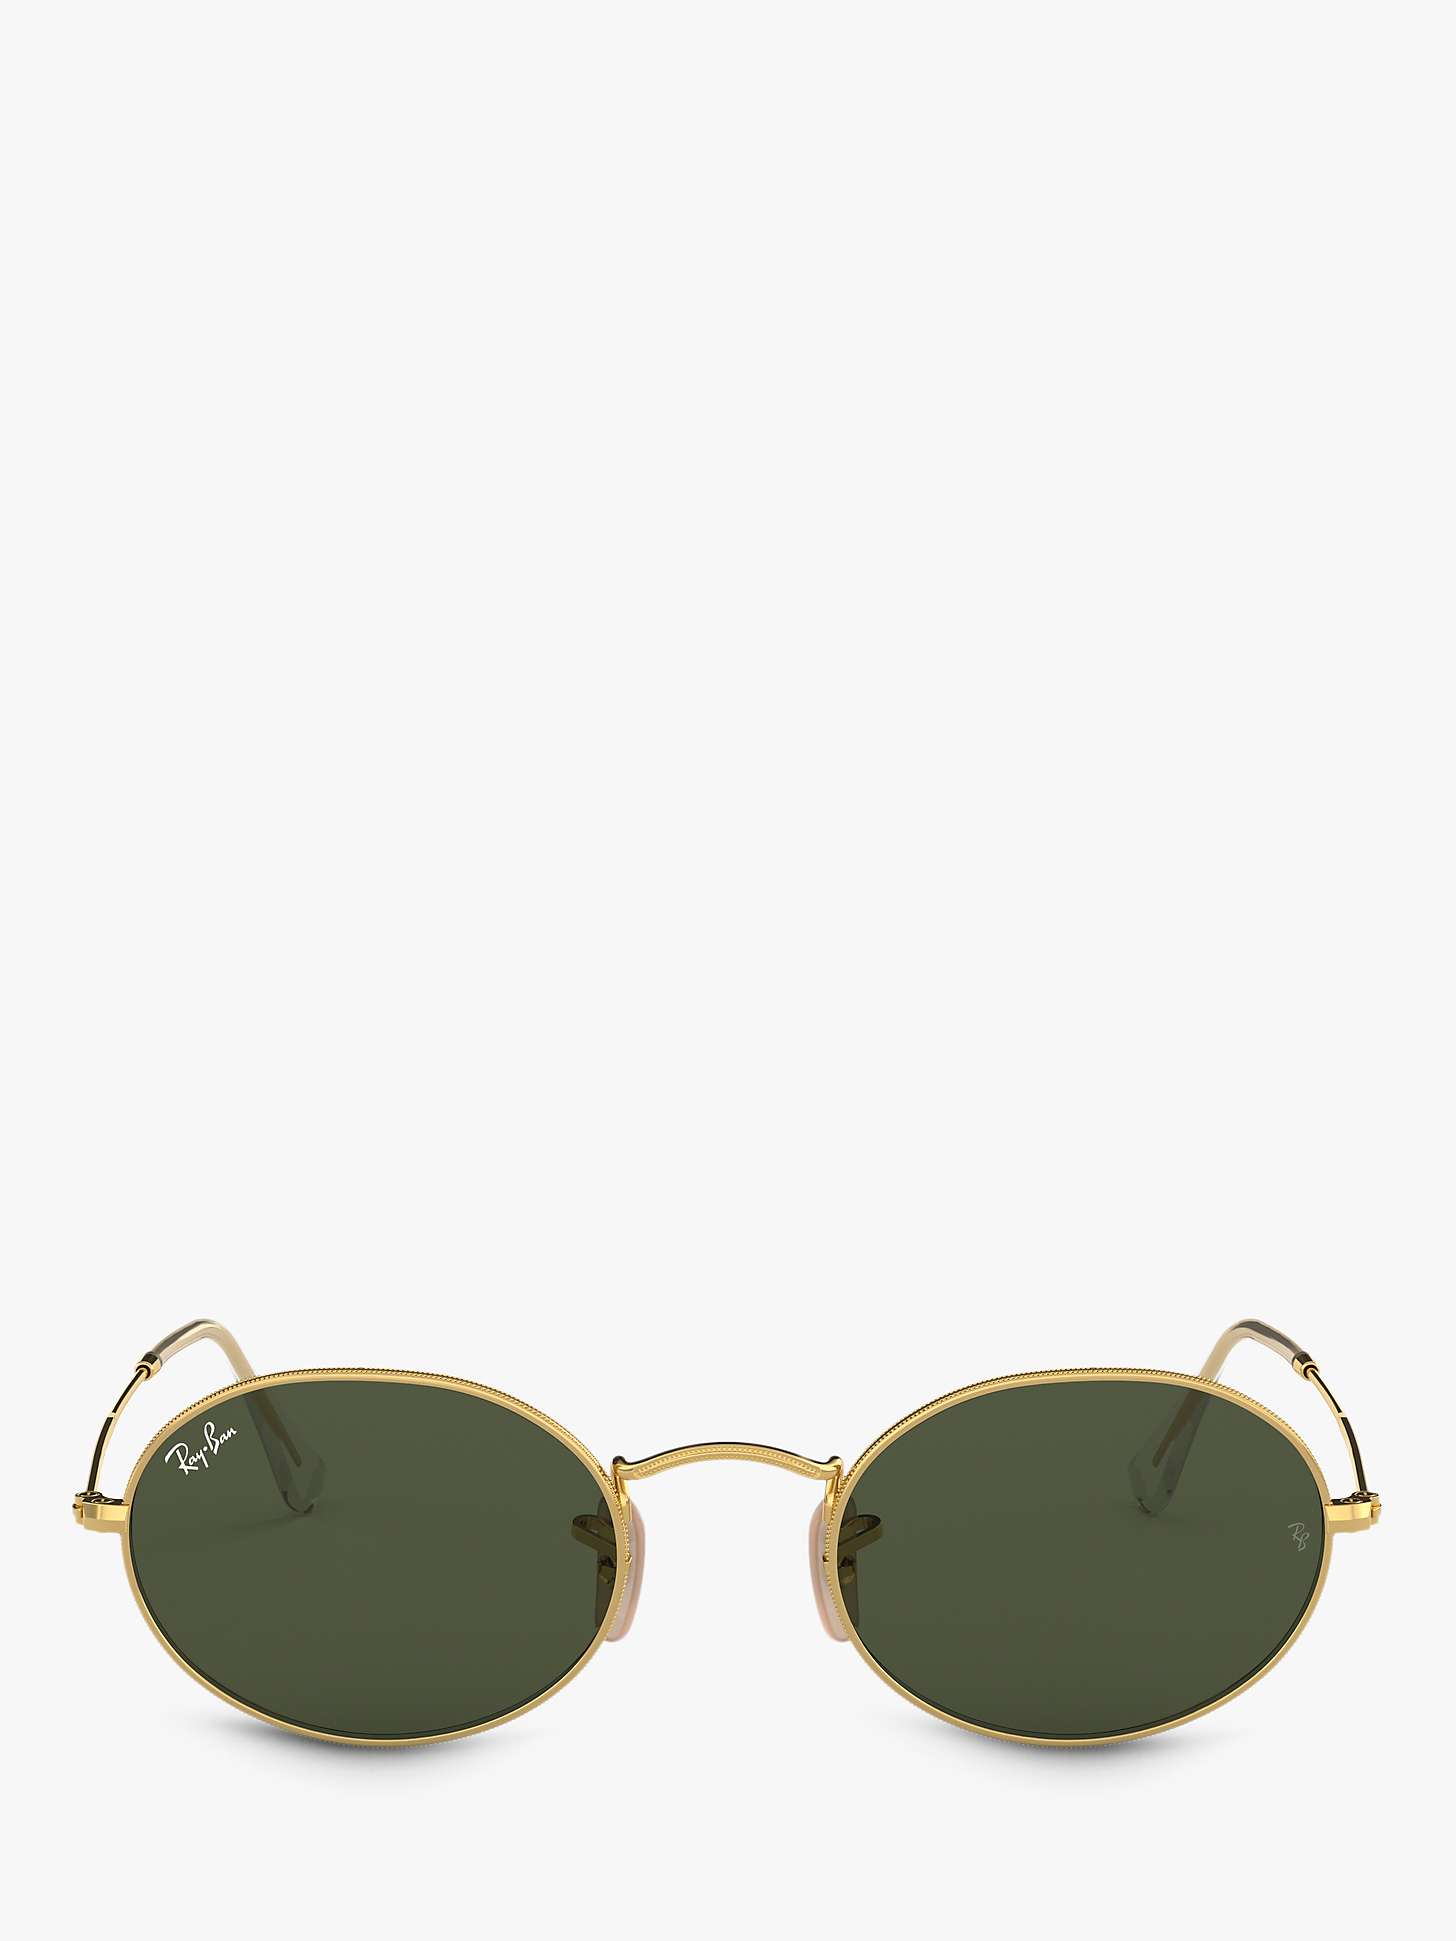 Buy Ray-Ban RB3547 Women's Oval Flat Lens Sunglasses, Gold/Green Online at johnlewis.com